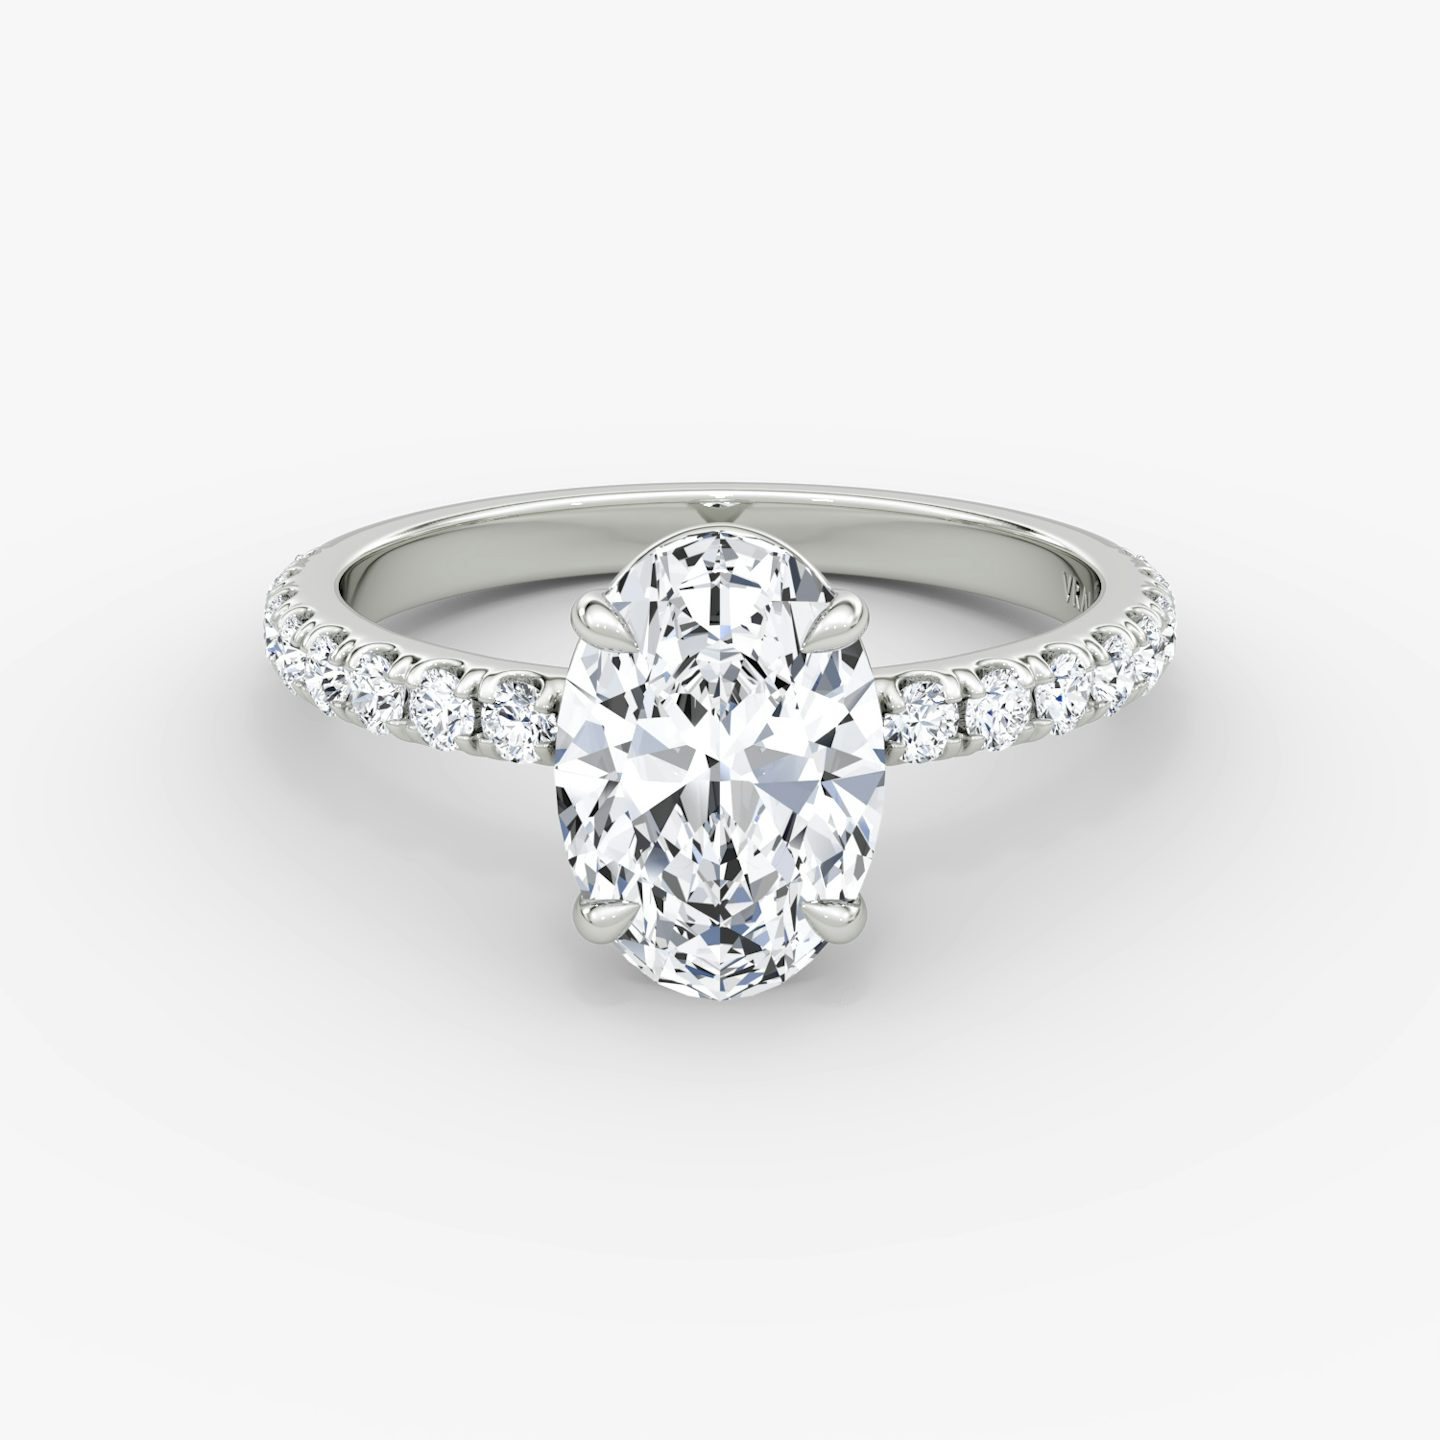 The Signature | Oval | 18k | 18k White Gold | Band: Pavé | Band width: Large | Setting style: Plain | Diamond orientation: vertical | Carat weight: See full inventory